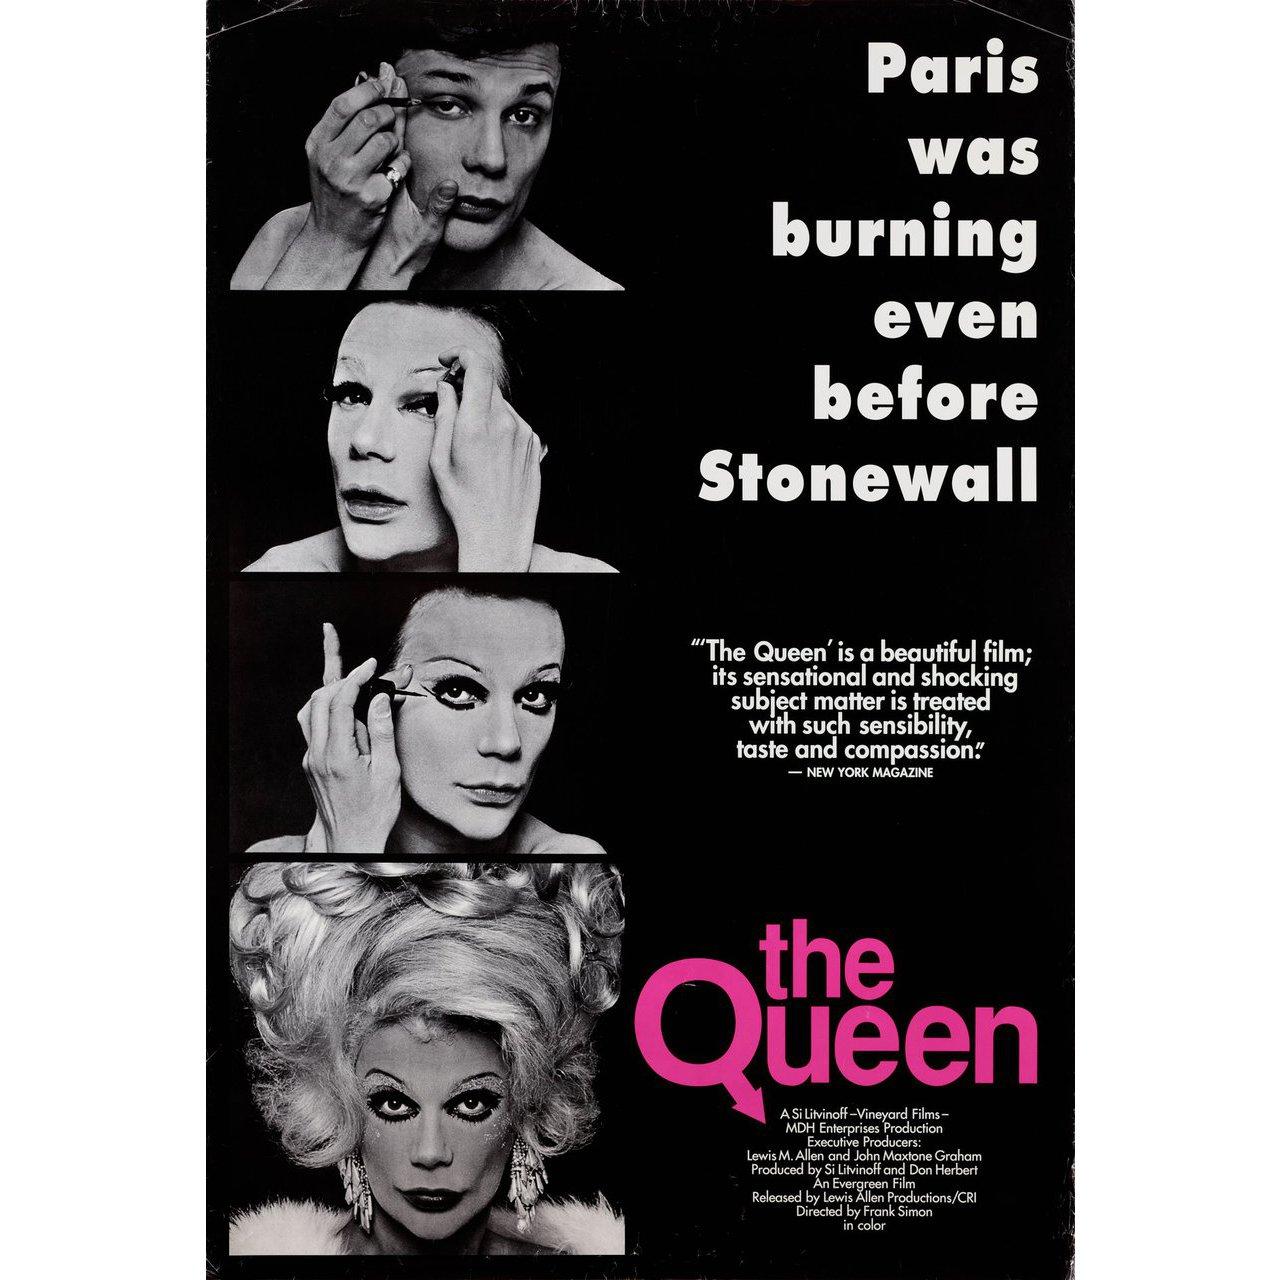 Original 1990s re-release British one sheet poster for the 1968 documentary film The Queen directed by Frank Simon with Jim Dine / Jack Doroshow / Richard Finnochio / Bruce Jay Friedman. Very Good condition, rolled with edge wear. Please note: the